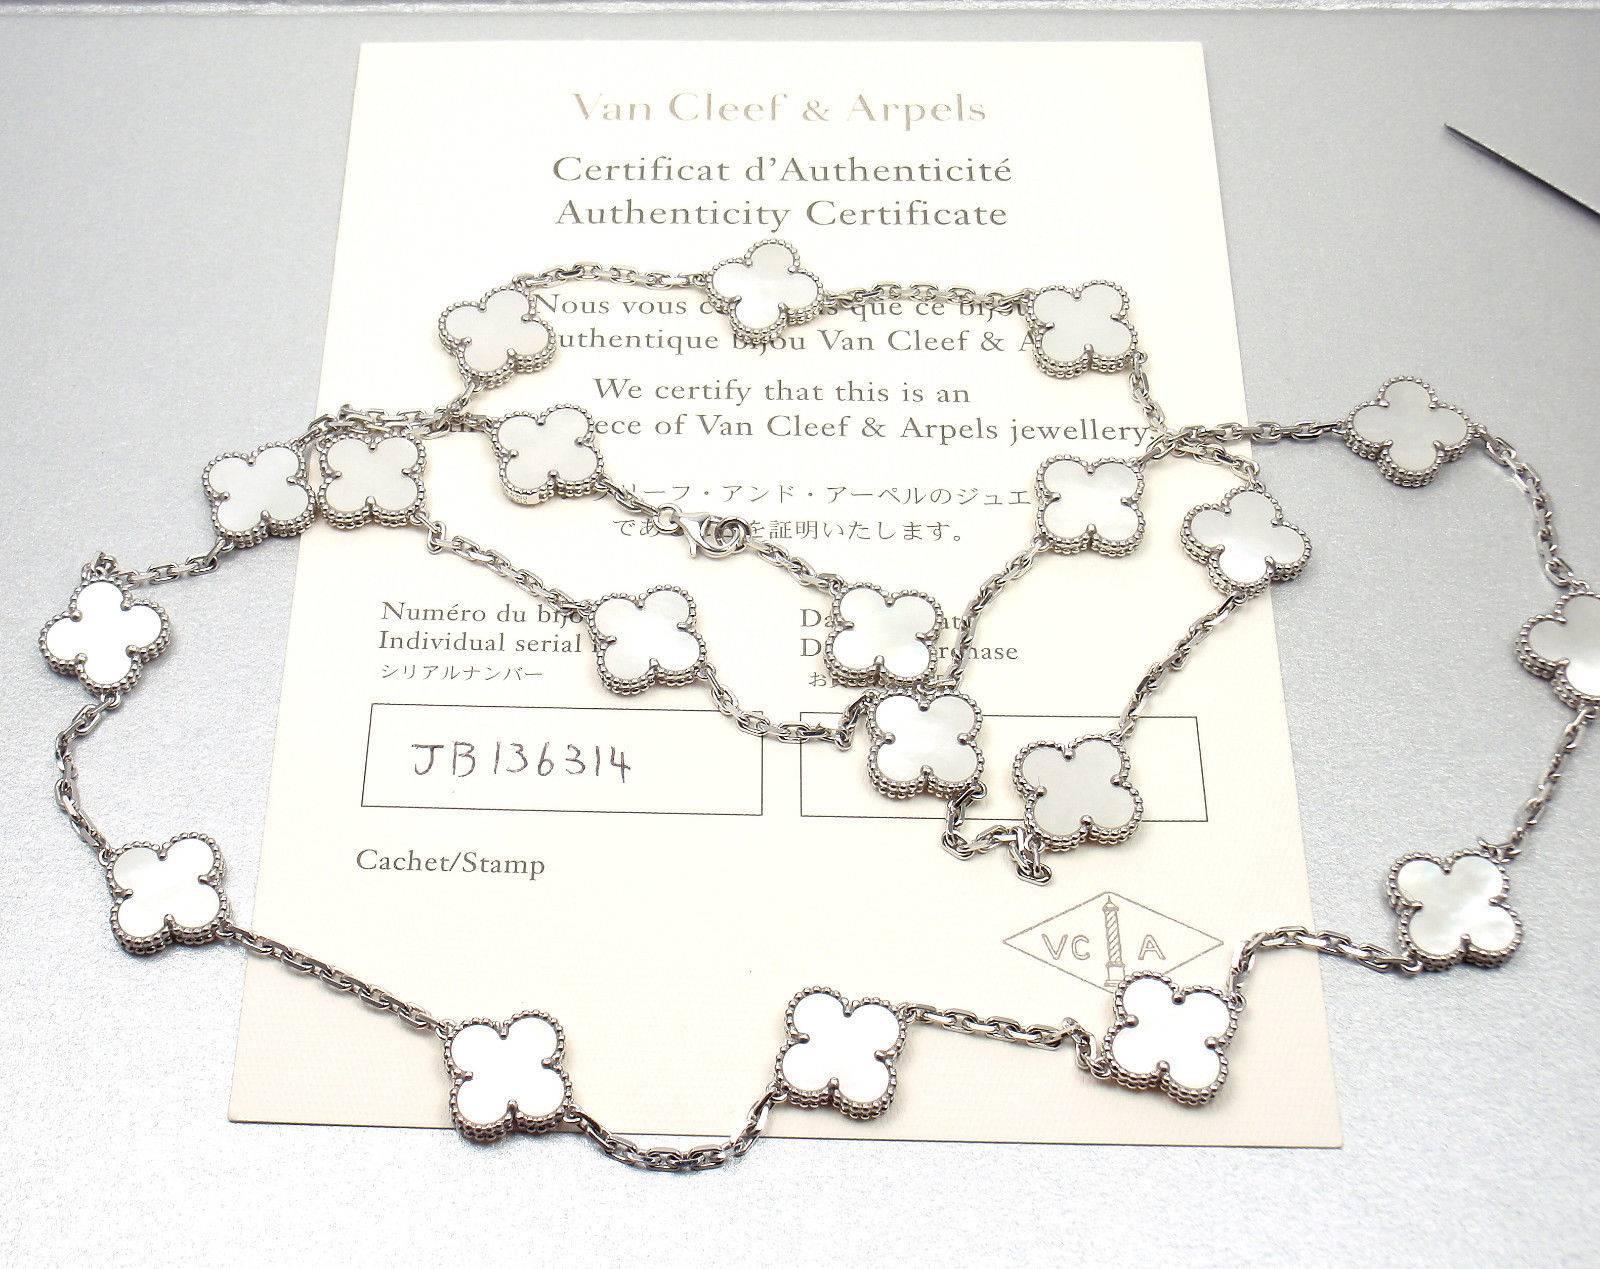 18k White Gold Alhambra 20 Motifs Mother Of Pearl Necklace by Van Cleef & Arpels. 
With 20 motifs of mother of pearl Alhambra stones 15mm each 
This necklace comes with Van Cleef & Arpels certificate. 
Details: 
Length: 33